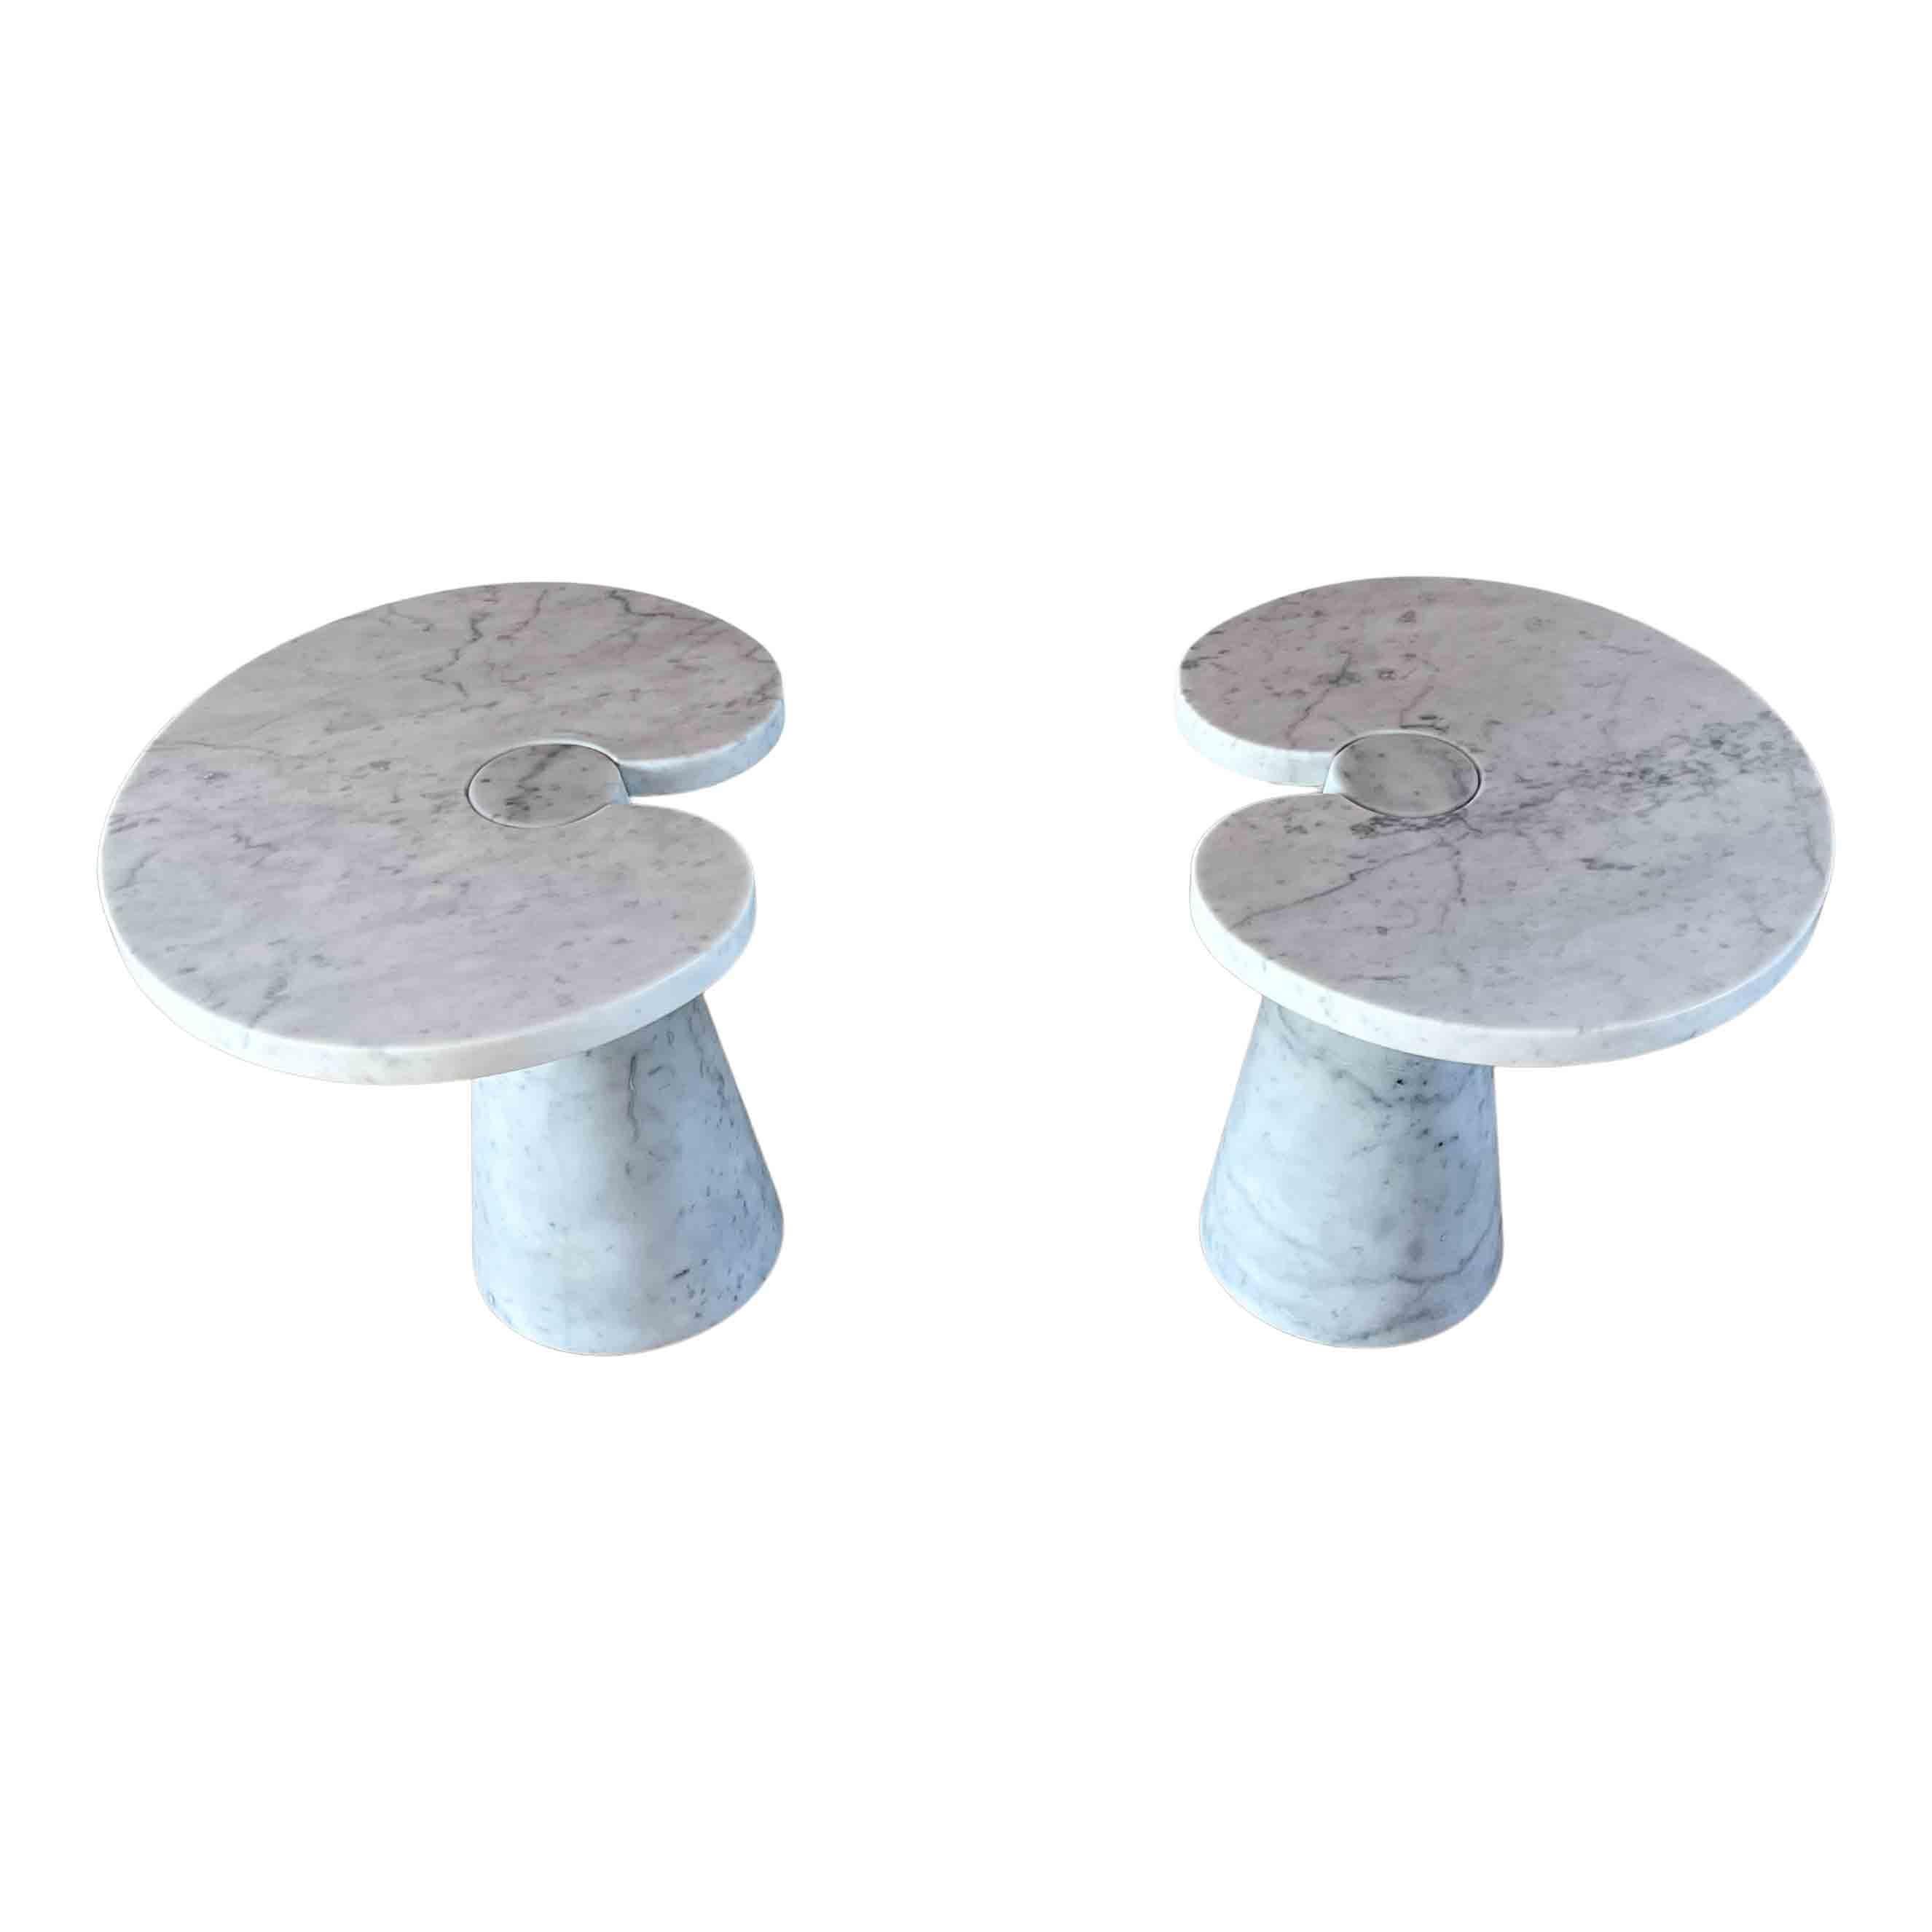 Pair of “Eros” side tables, designed by Angelo Mangiarotti and manufactured by Skipper in 1972.
Made of white Carrara marble.
Excellent vintage condition.
The Eros series by Angelo Mangiarotti is a collection of tables presented in 1971.
The main